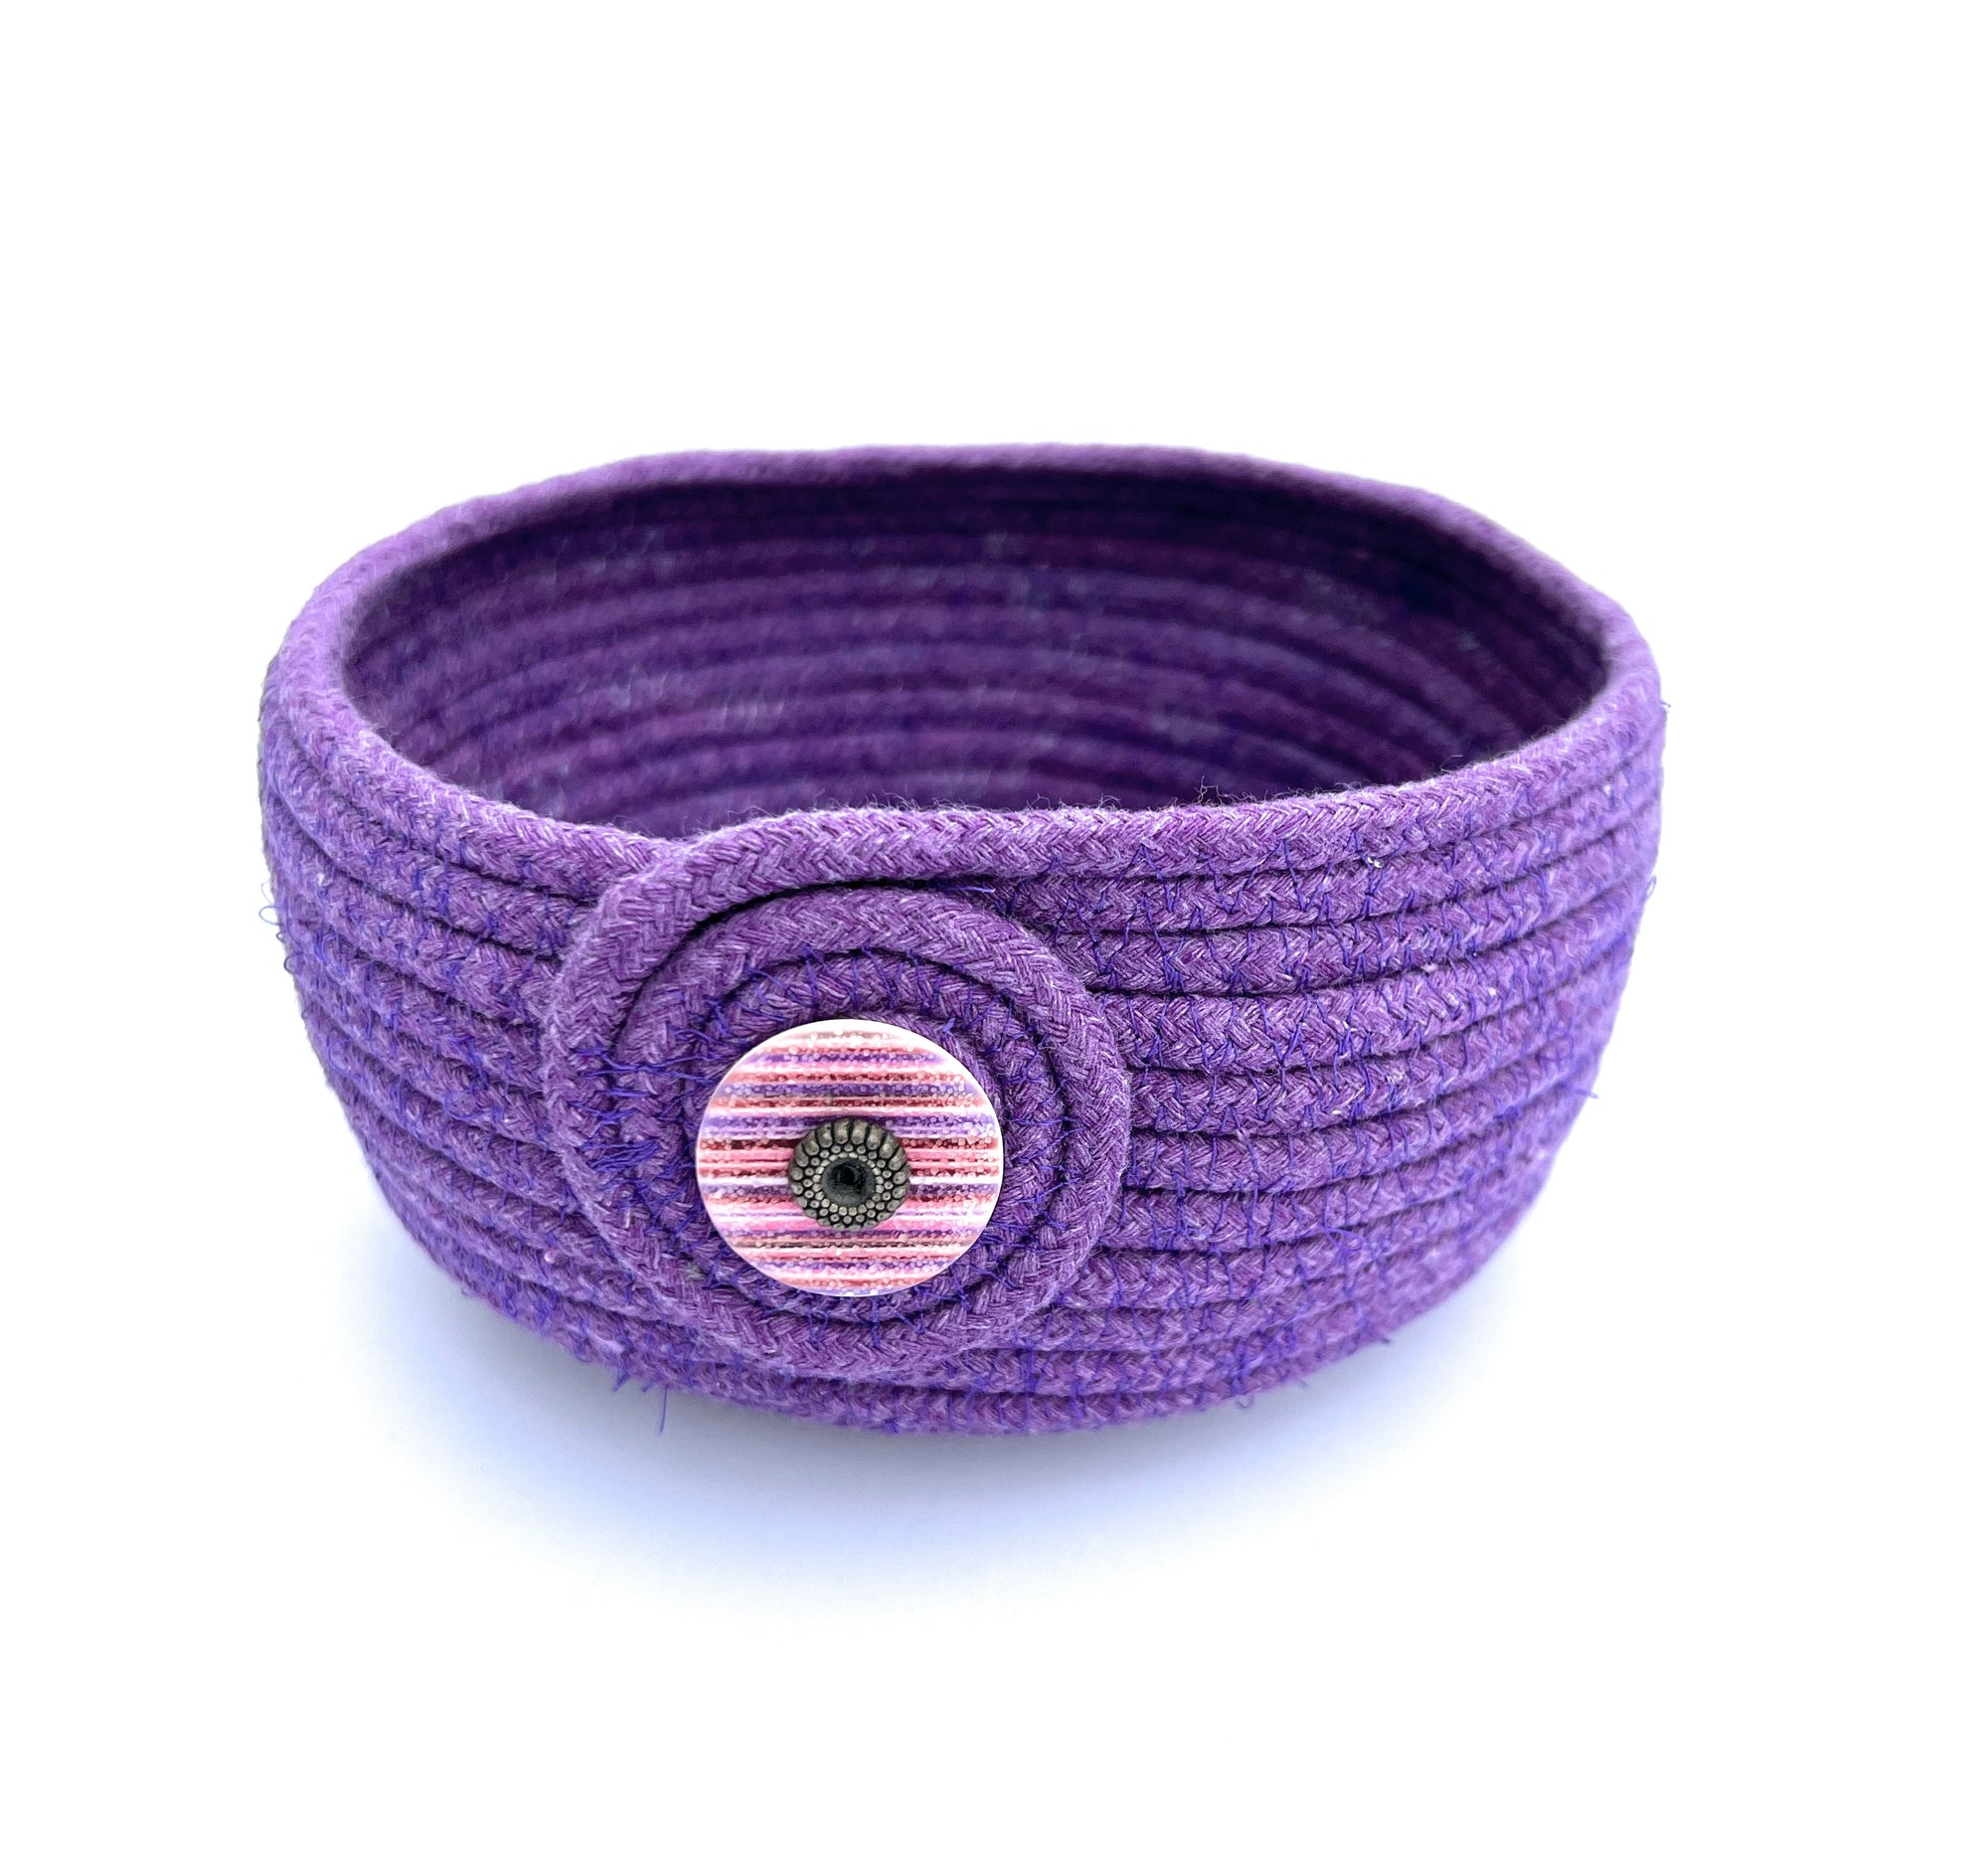 Coiled Rope Bowl in Lavendar Purple